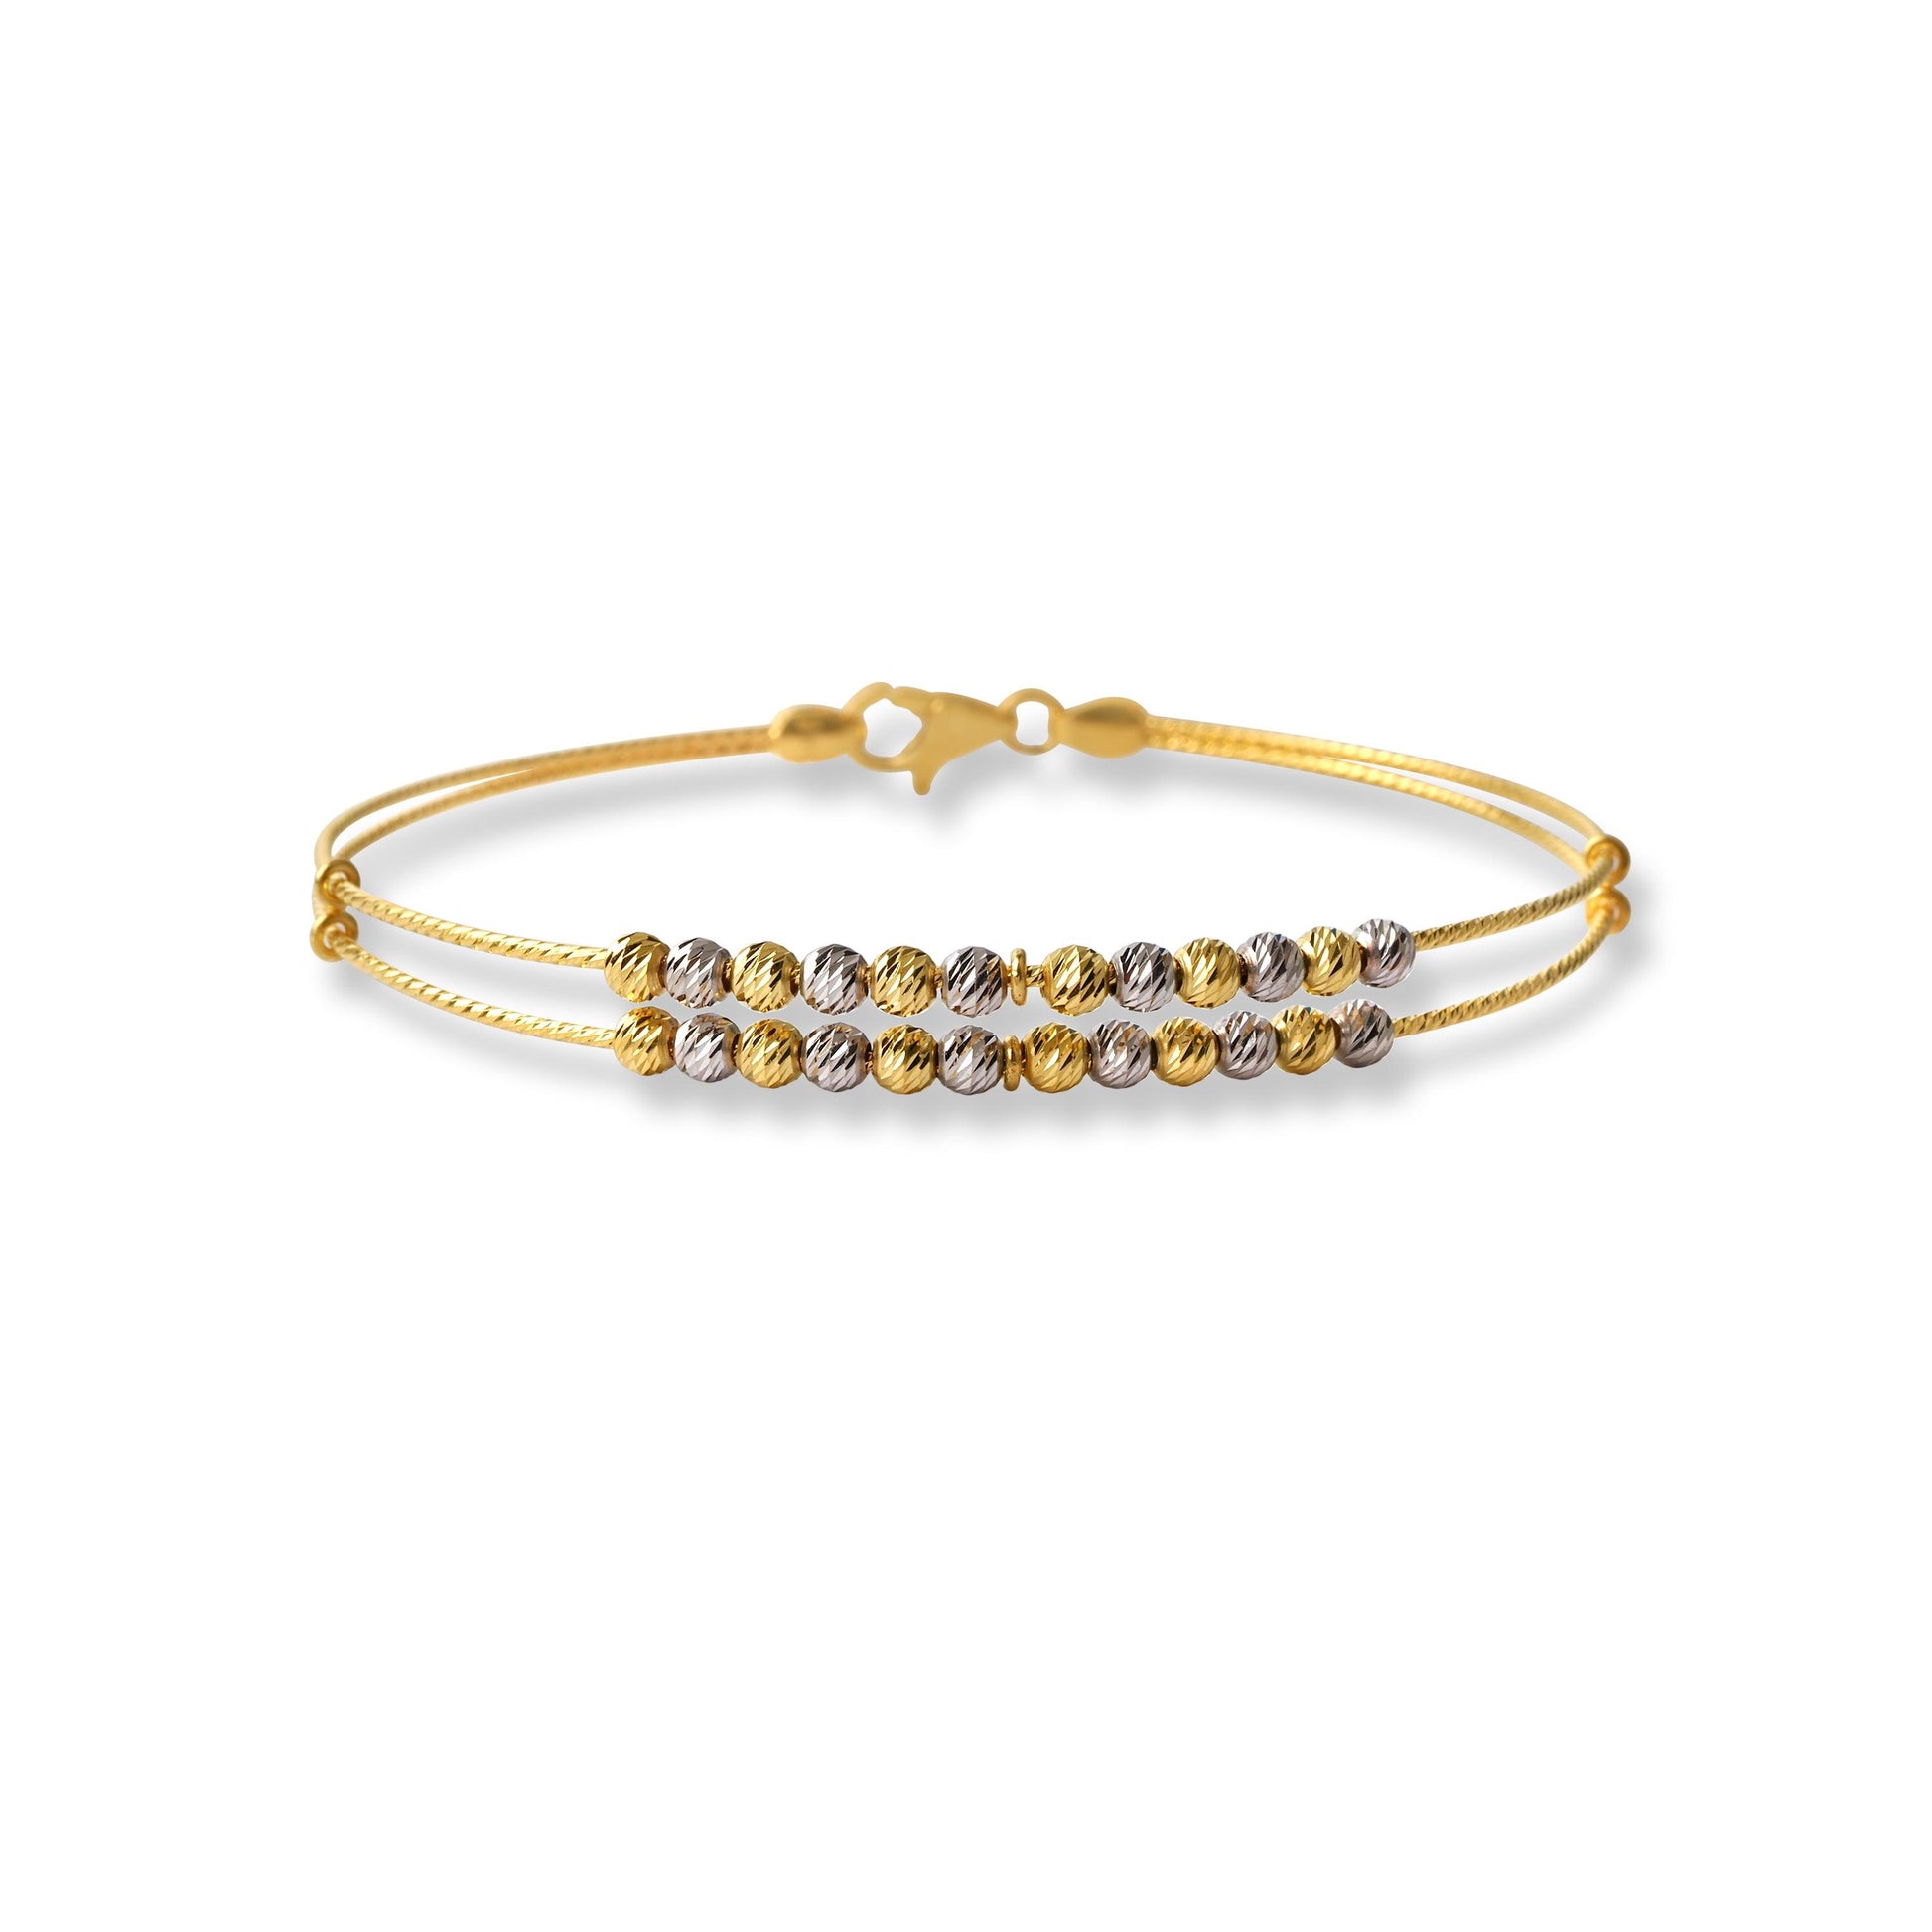 22ct Gold Rhodium Plated Beads Bangle With Rounded Trigger Clasp (7.0g) B-8443 - Minar Jewellers